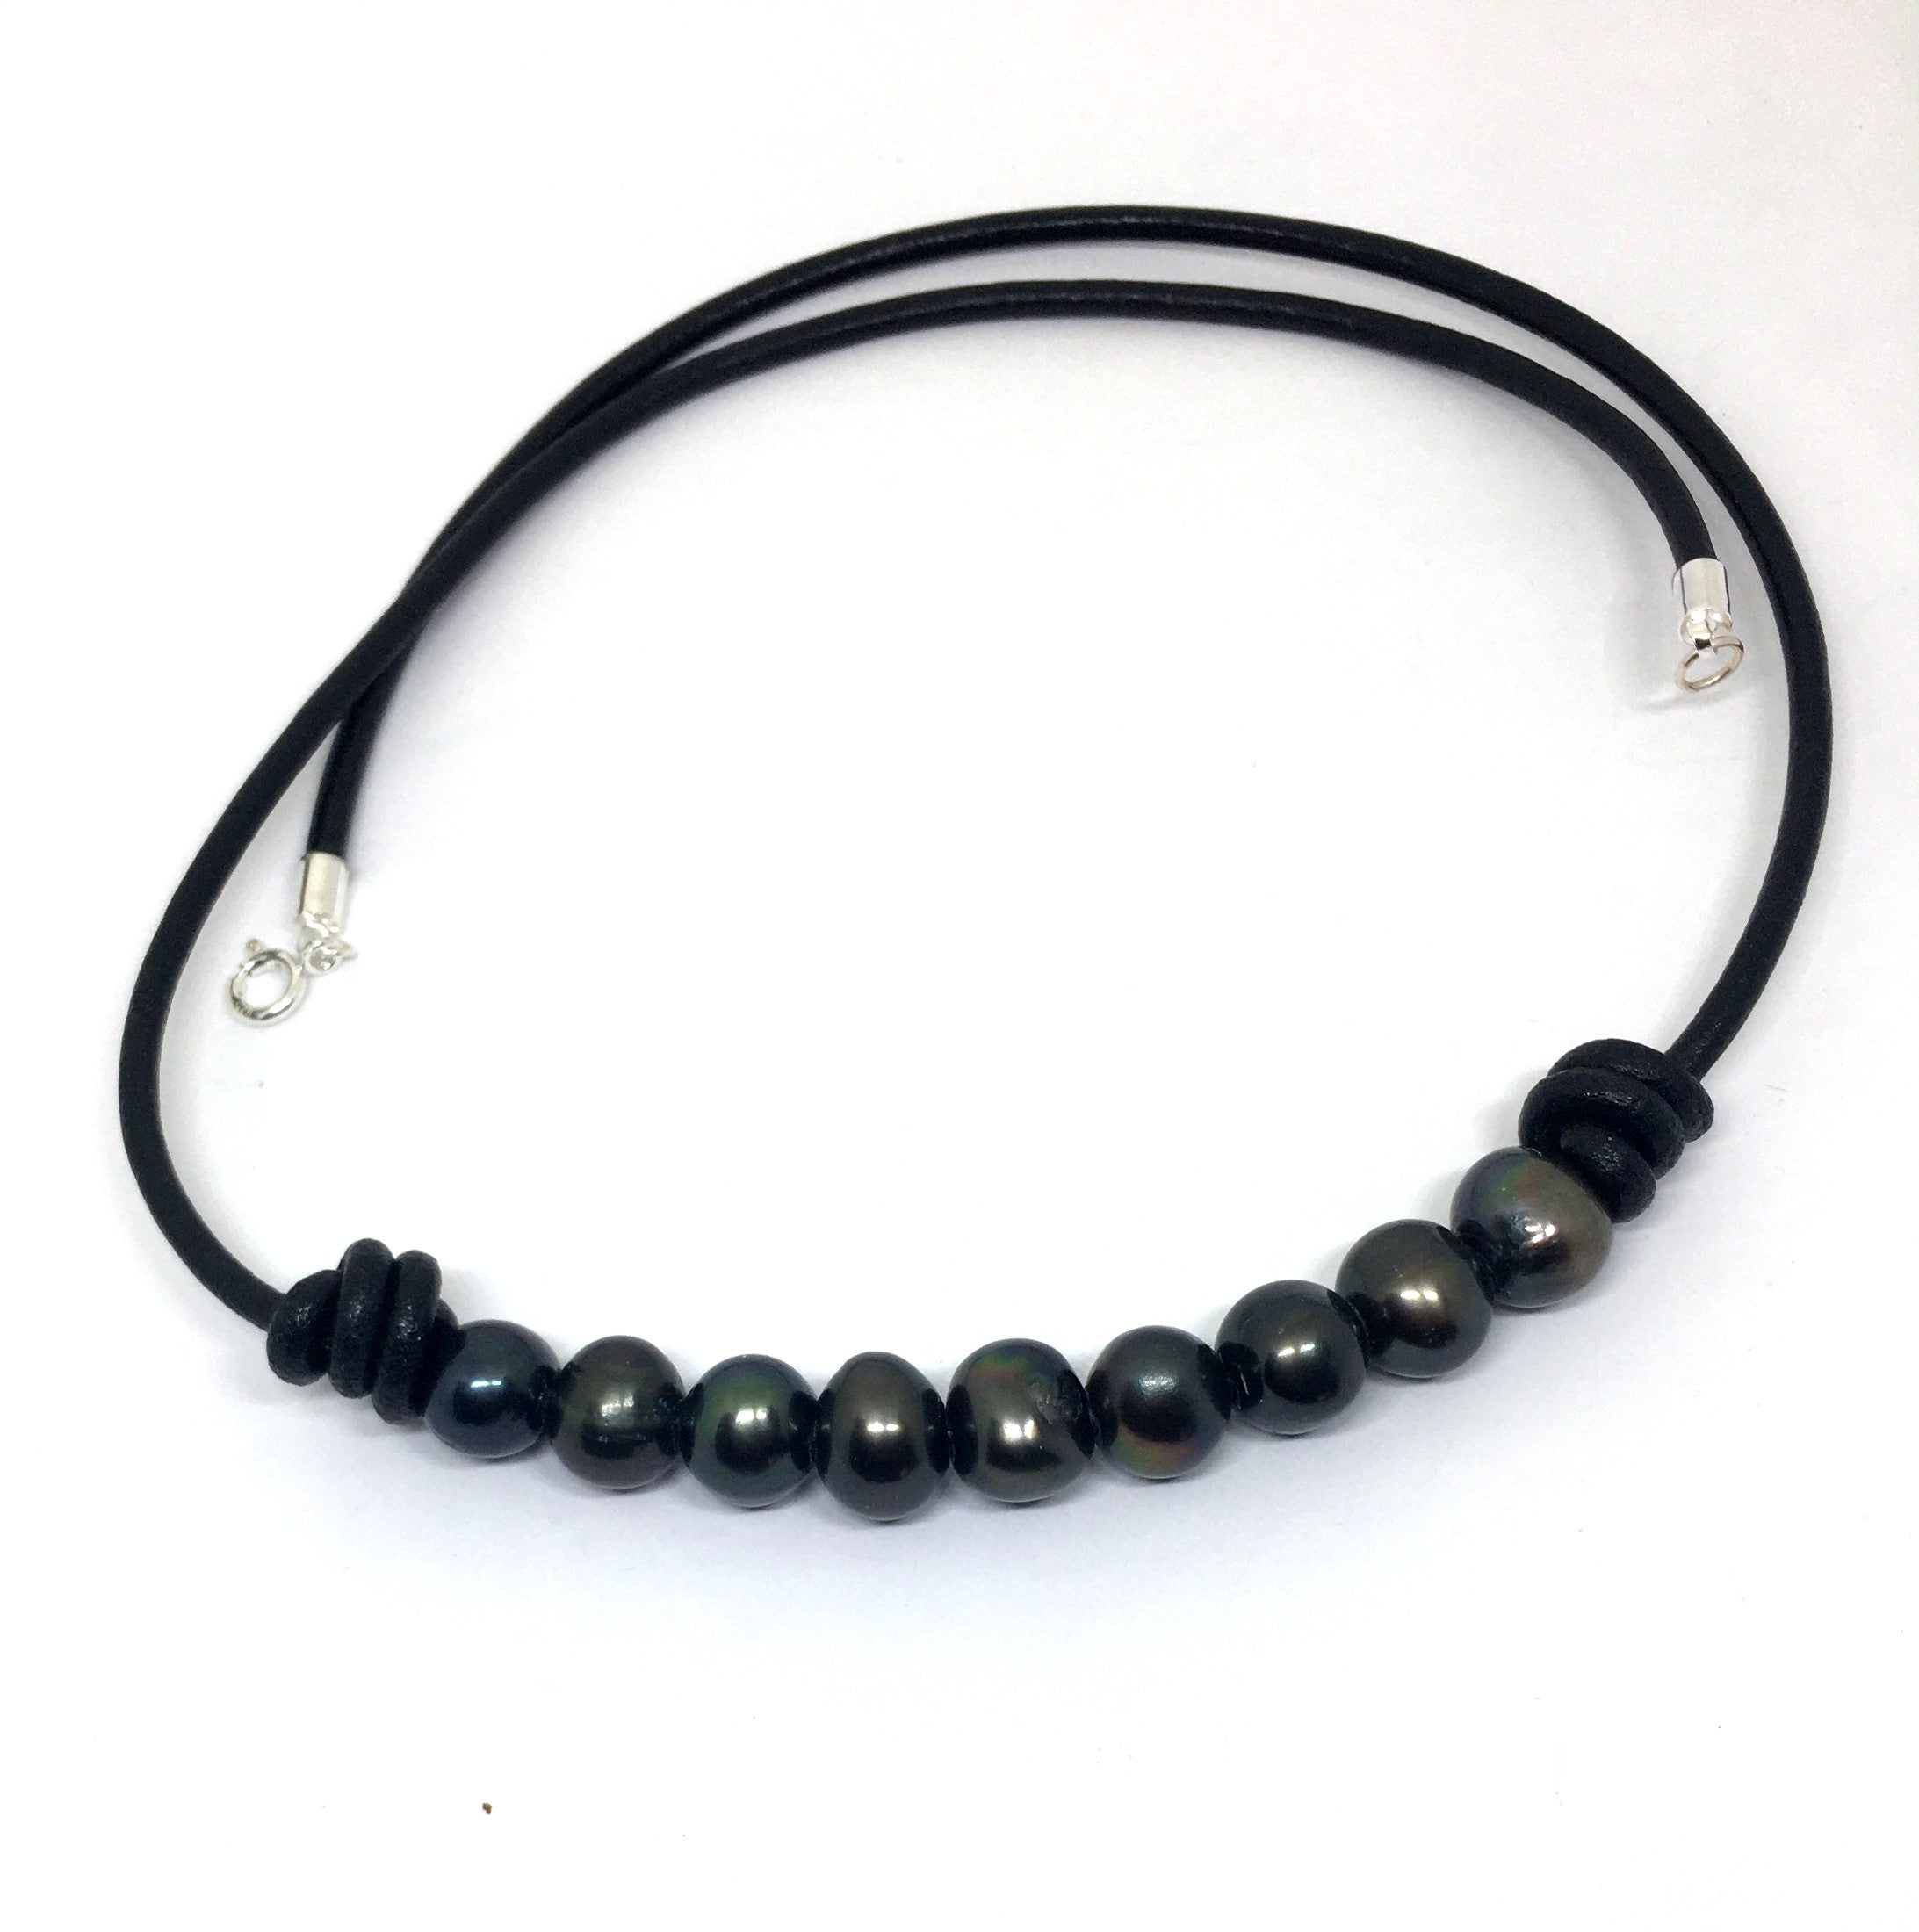 Black Pearl Barrel Knot Leather Necklace for Men and Women